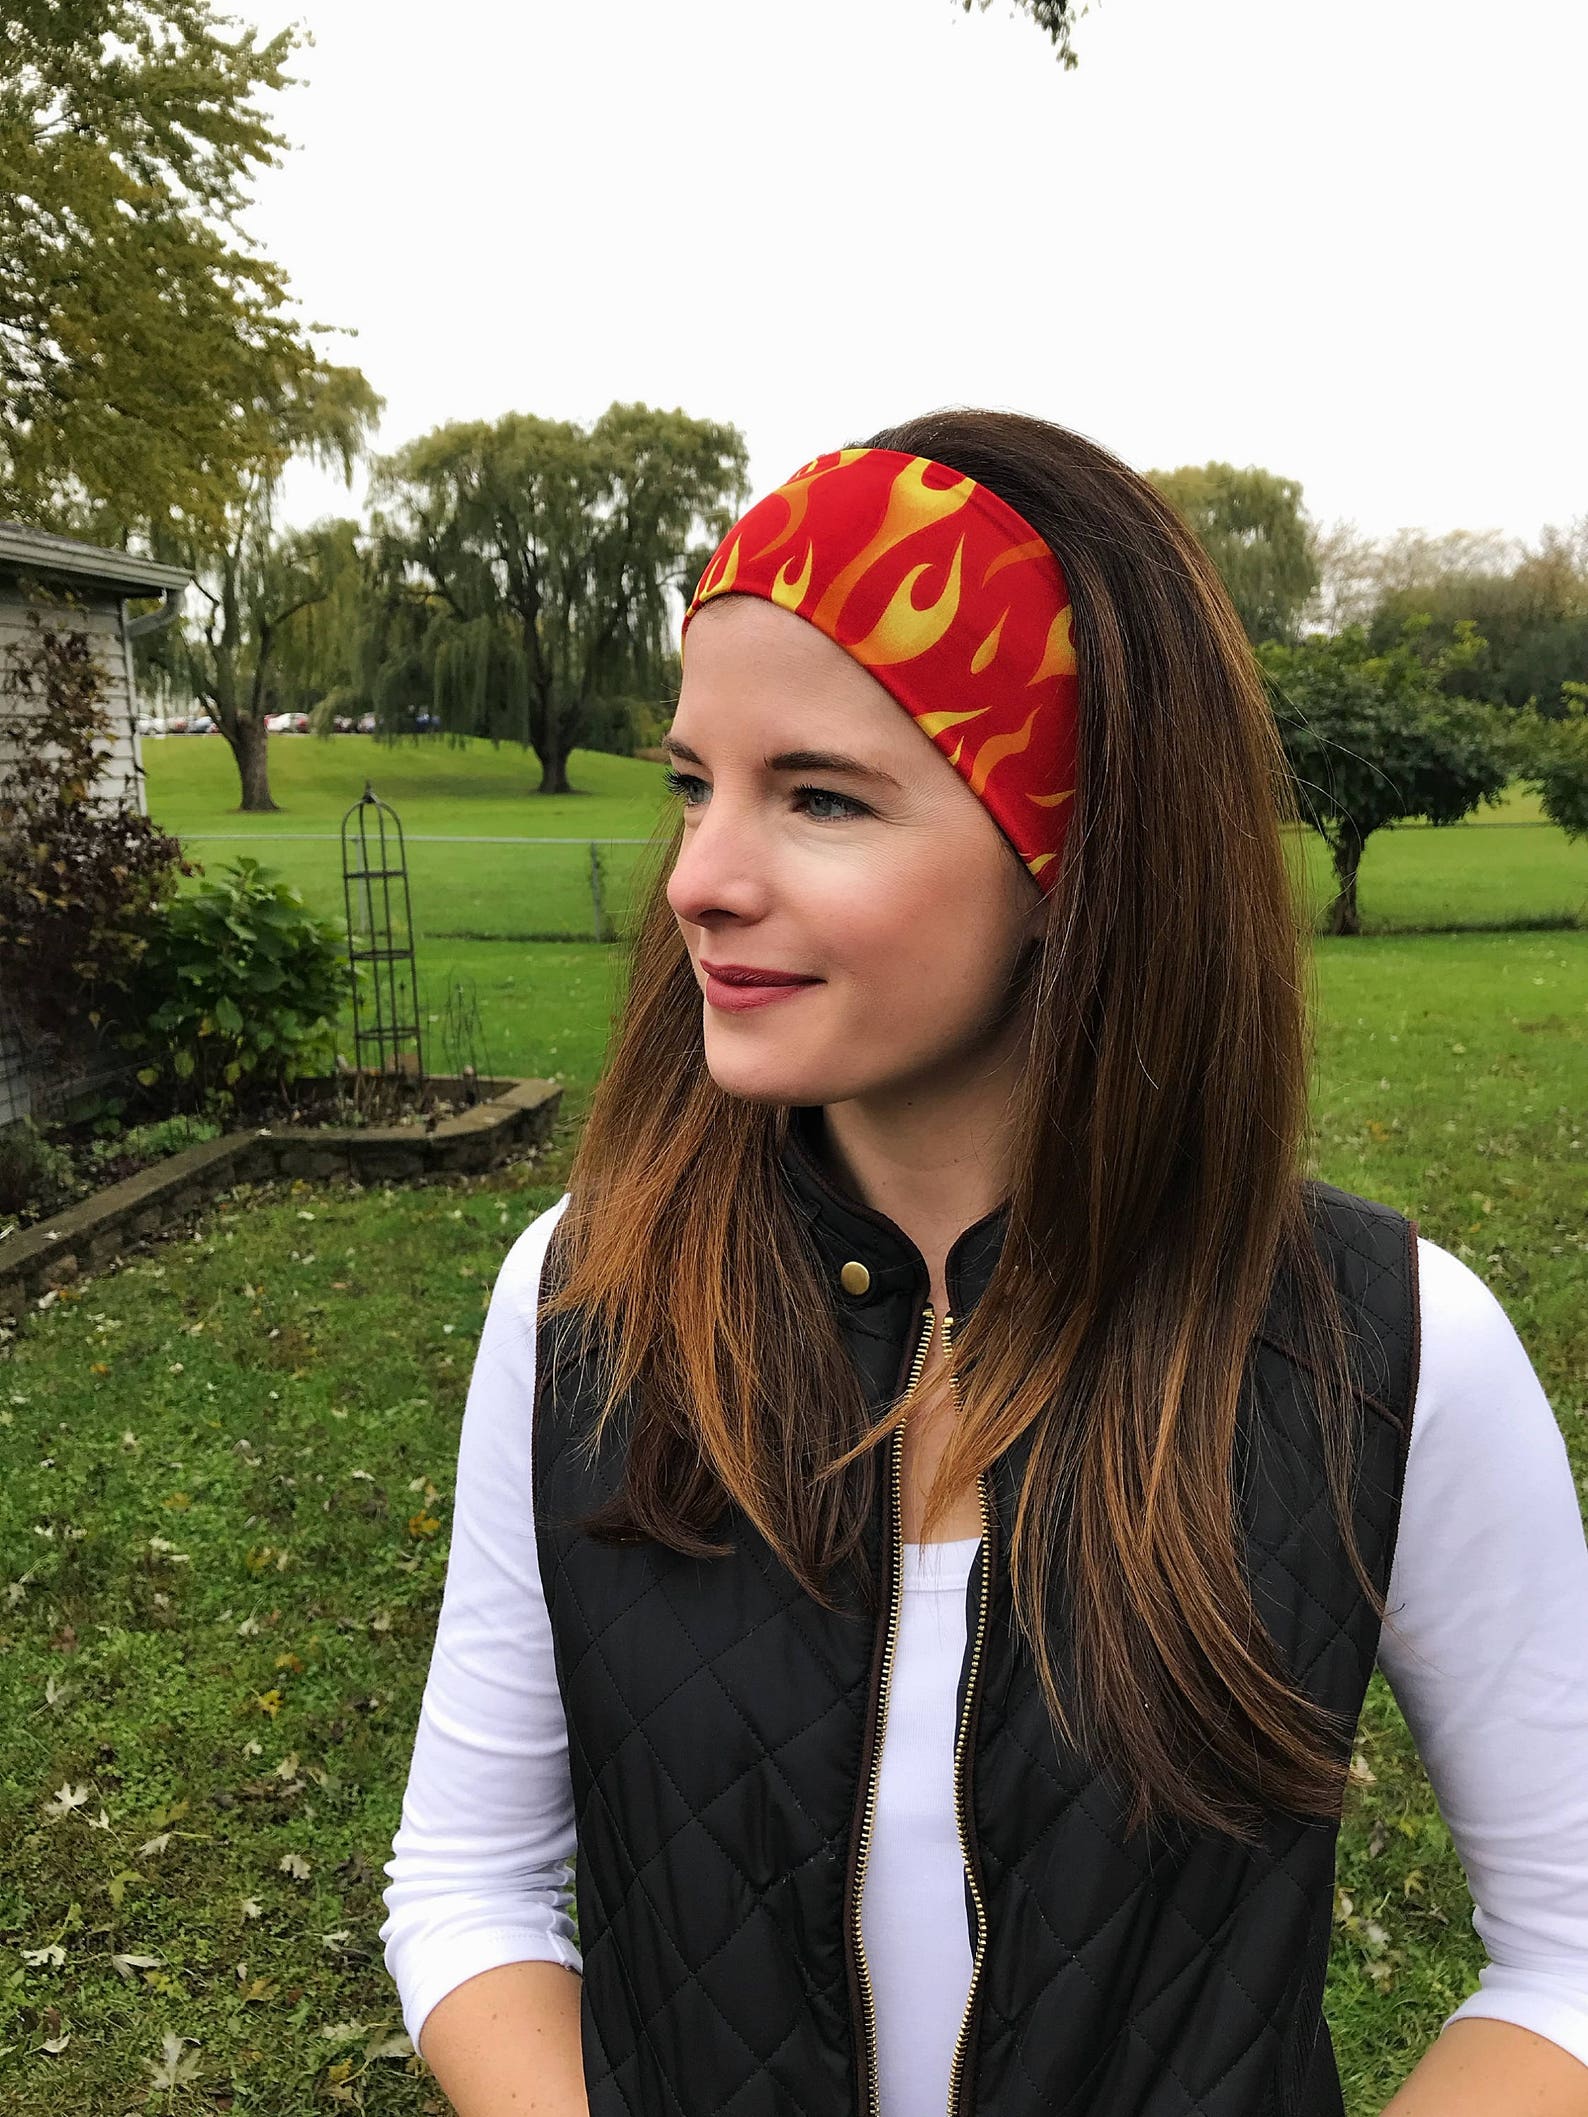 Flame Headbands Black With Flames Red With Flames Swag - Etsy